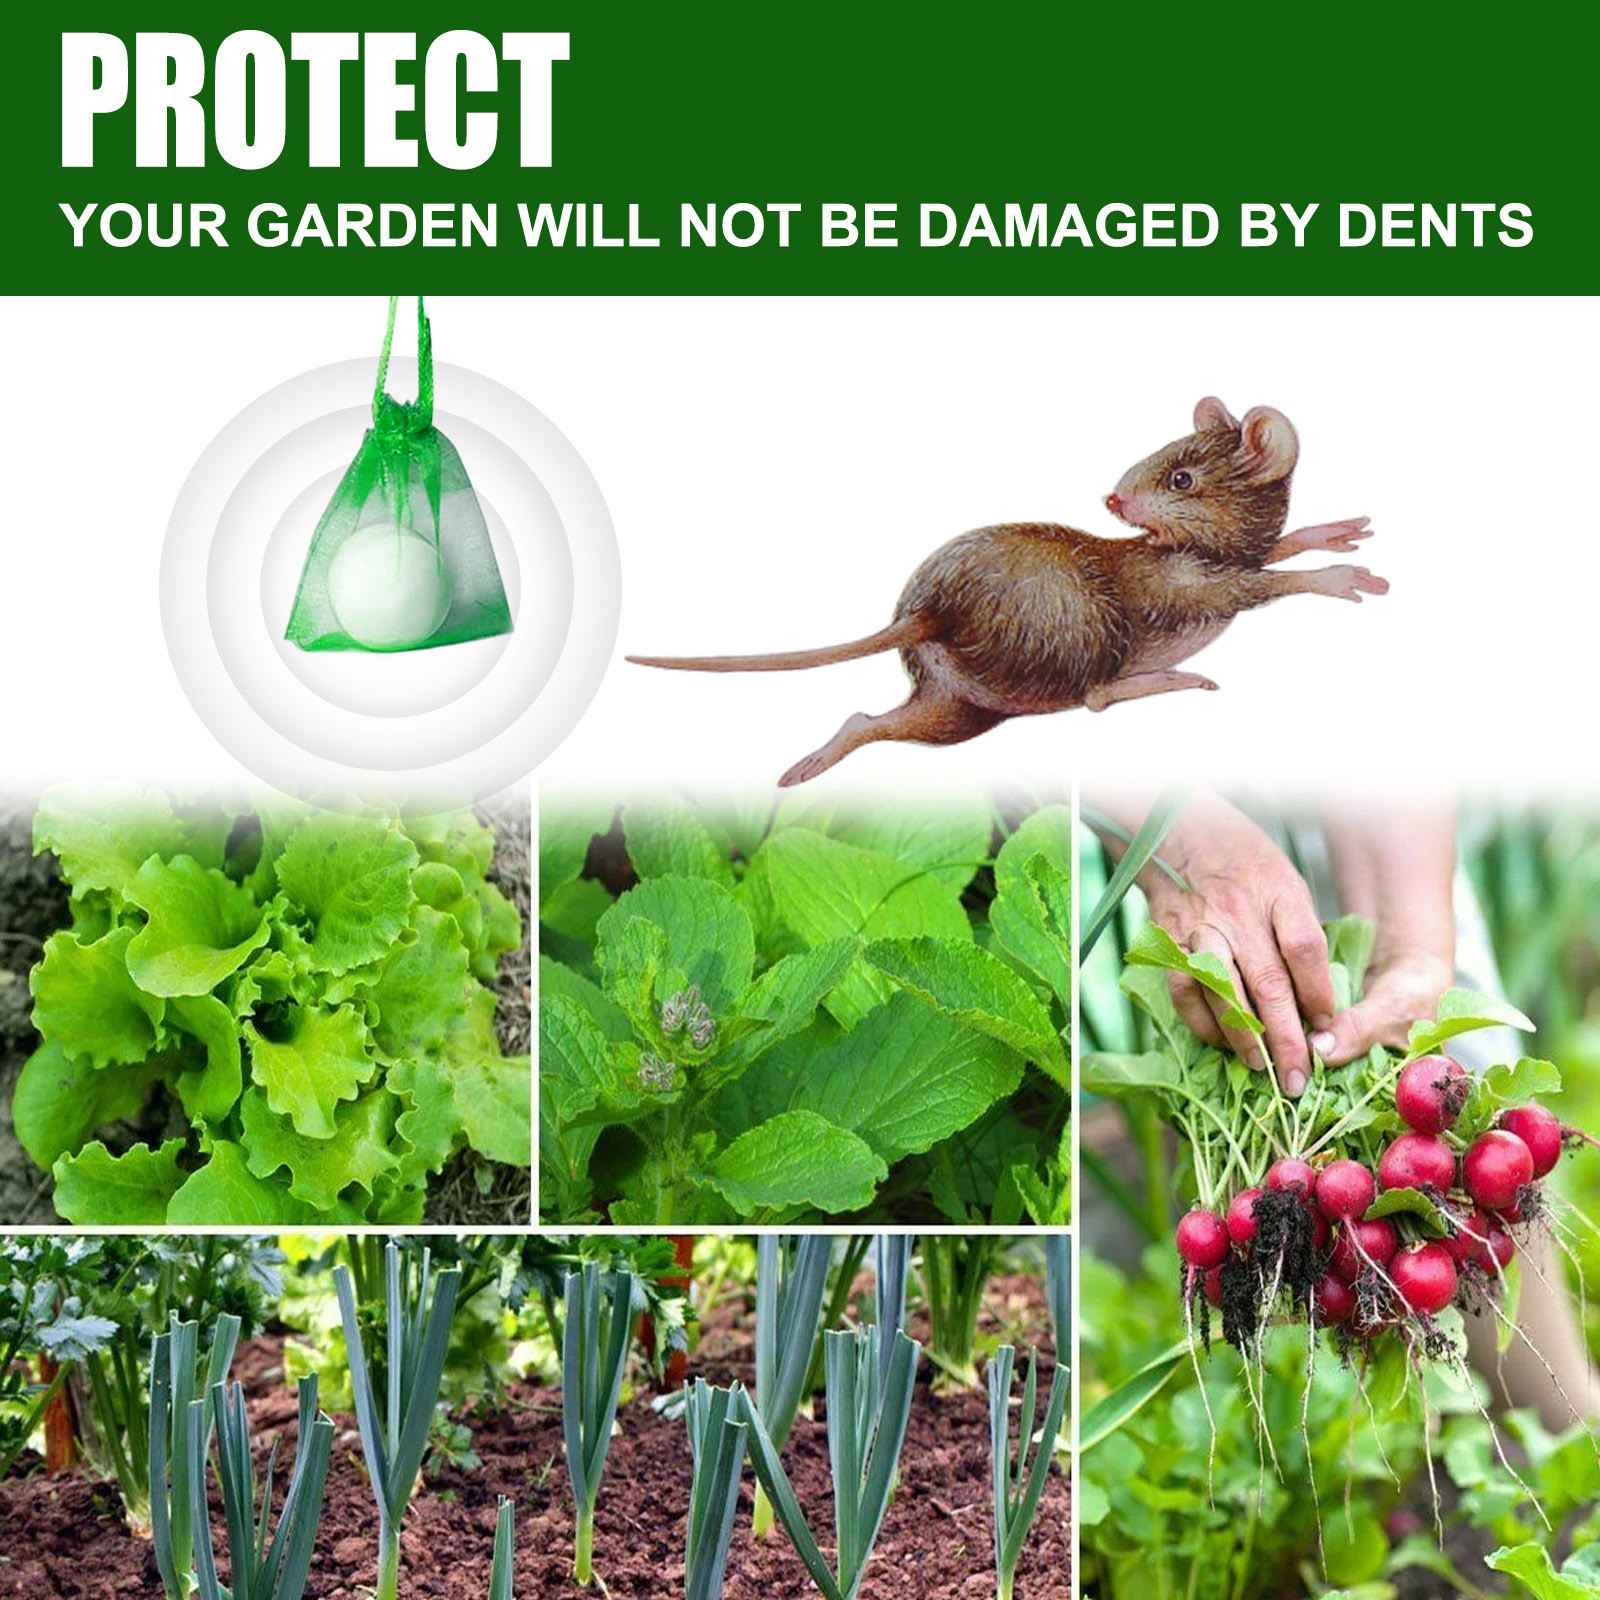 Rodent Repellent Pack for Preppers